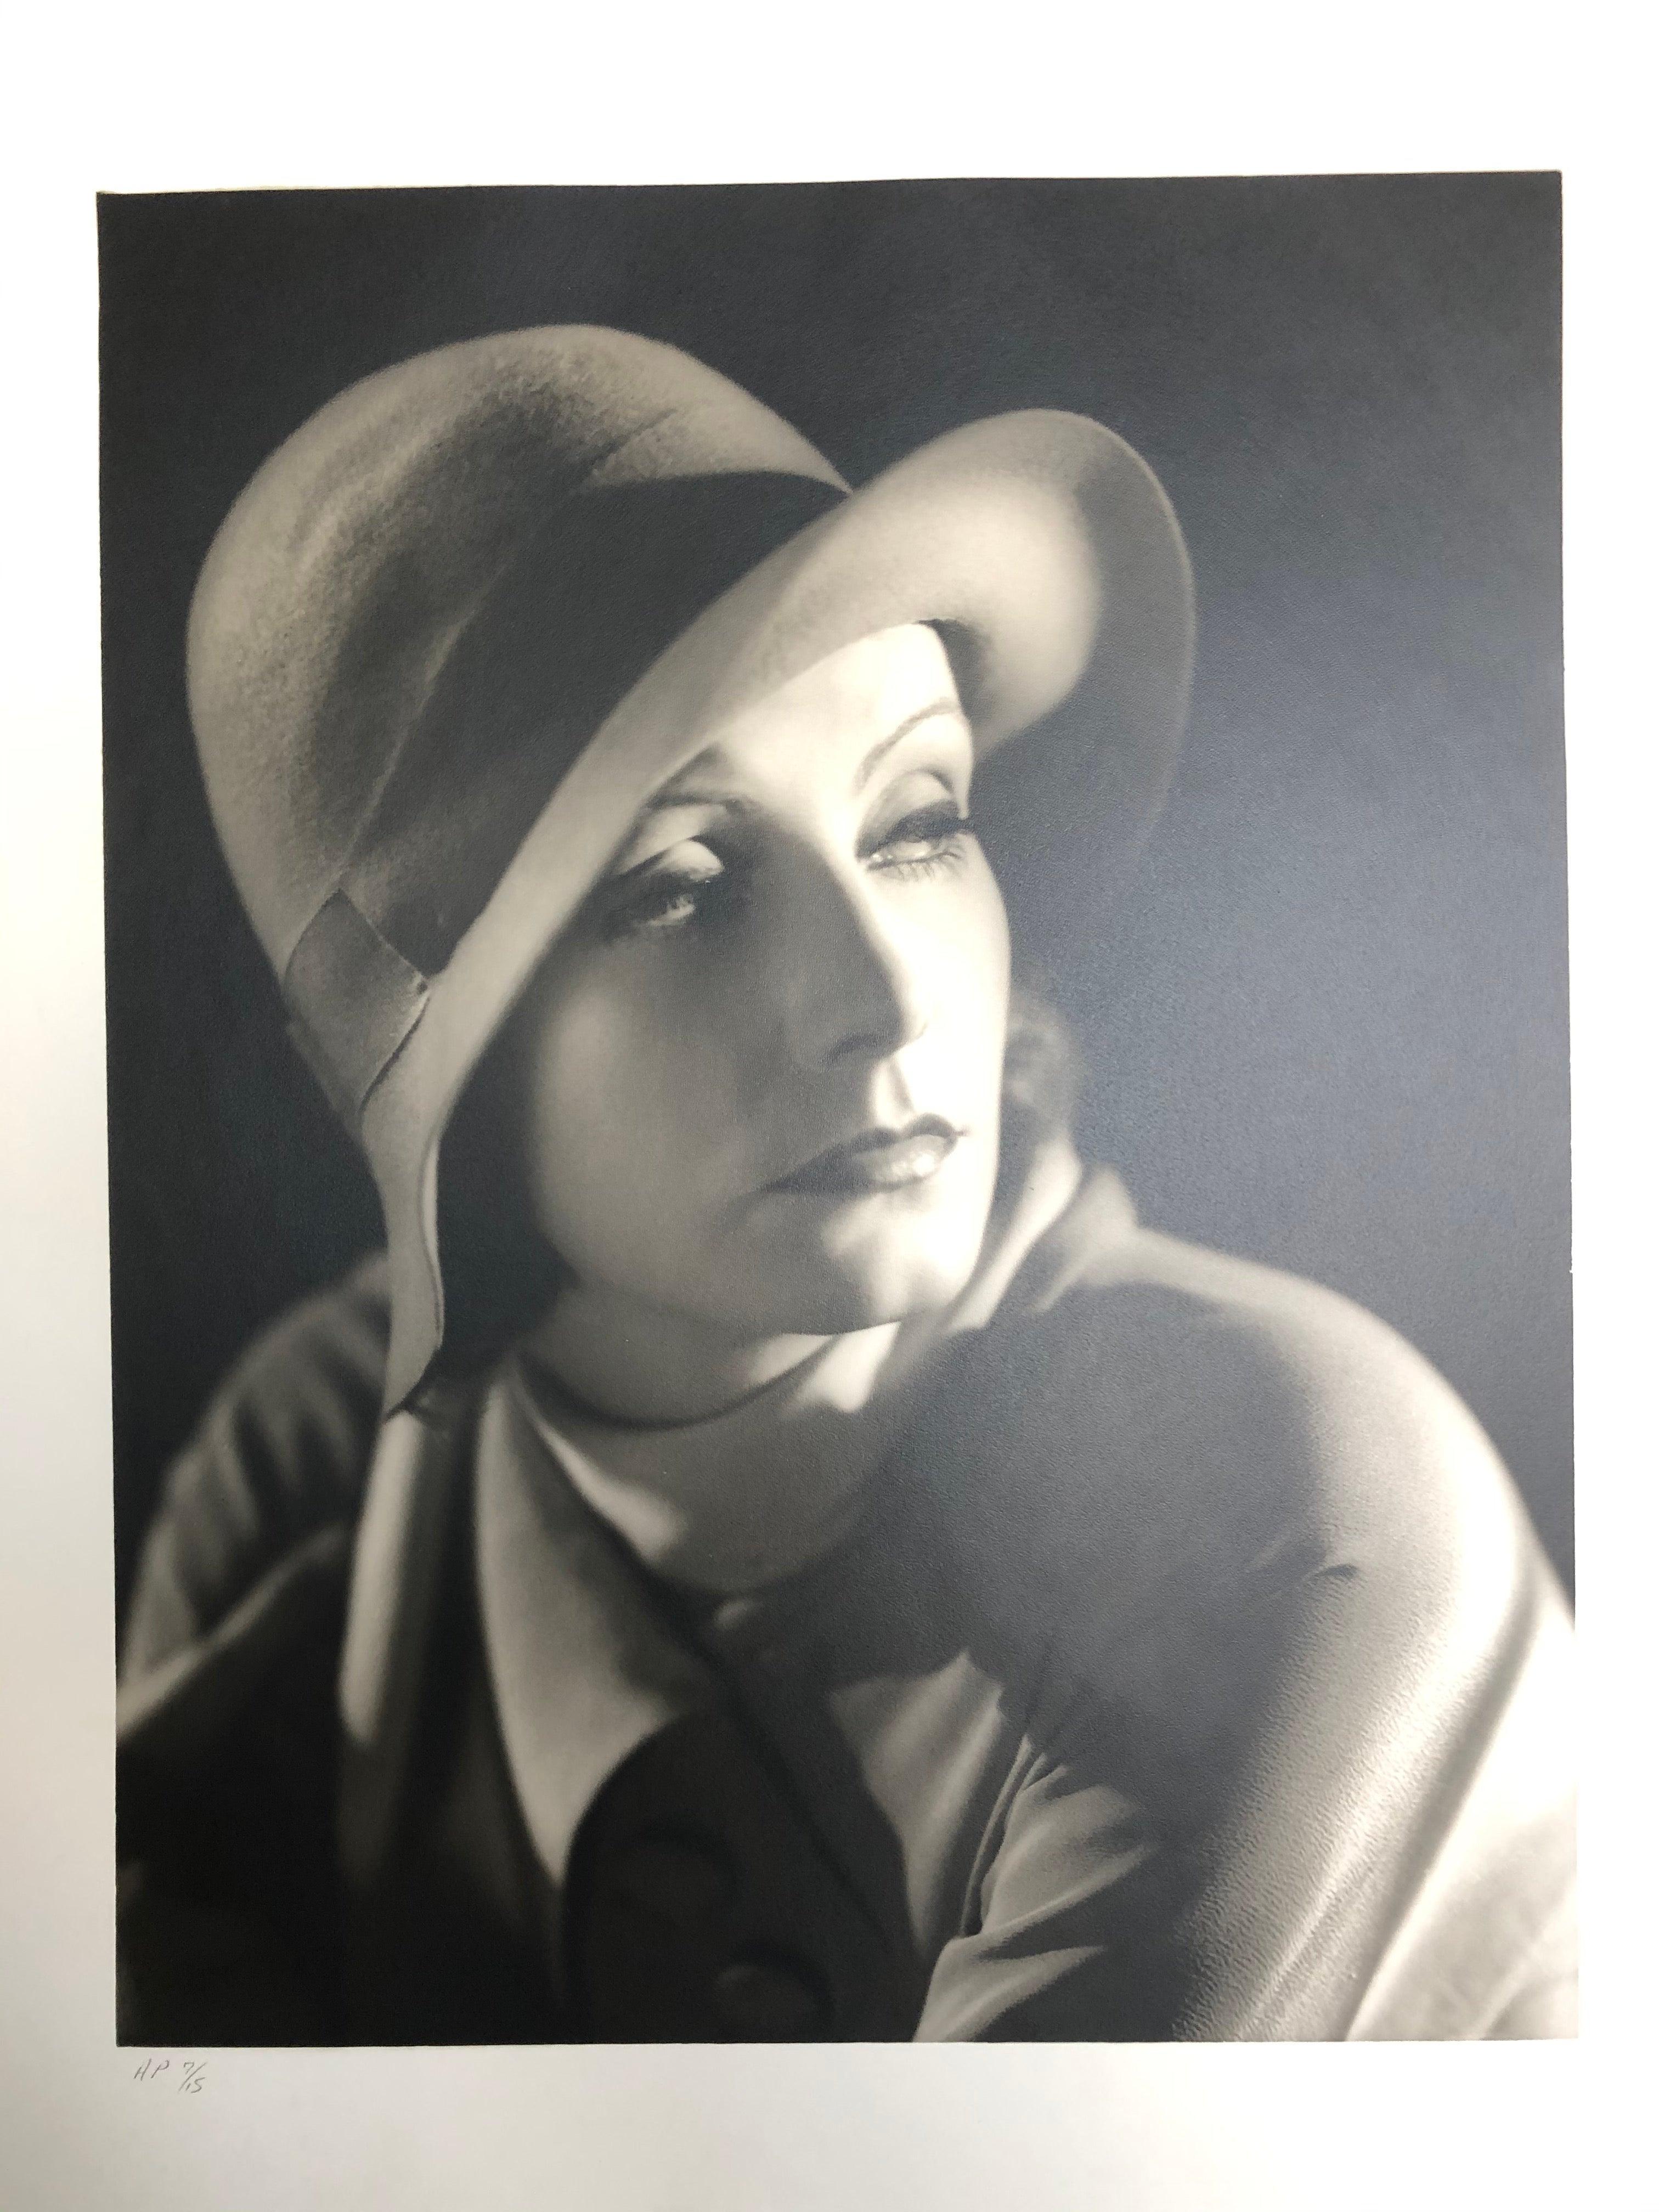 Greta Garbo-bowler hat vintage
AP 7/15
Image size: 14 x 11 In
Sheet size: 2- x 16 in
Embossed signature
Printed later

Along with George Hurrell, Clarence Sinclair Bull effectively invented the Hollywood celebrity still, with romantic images